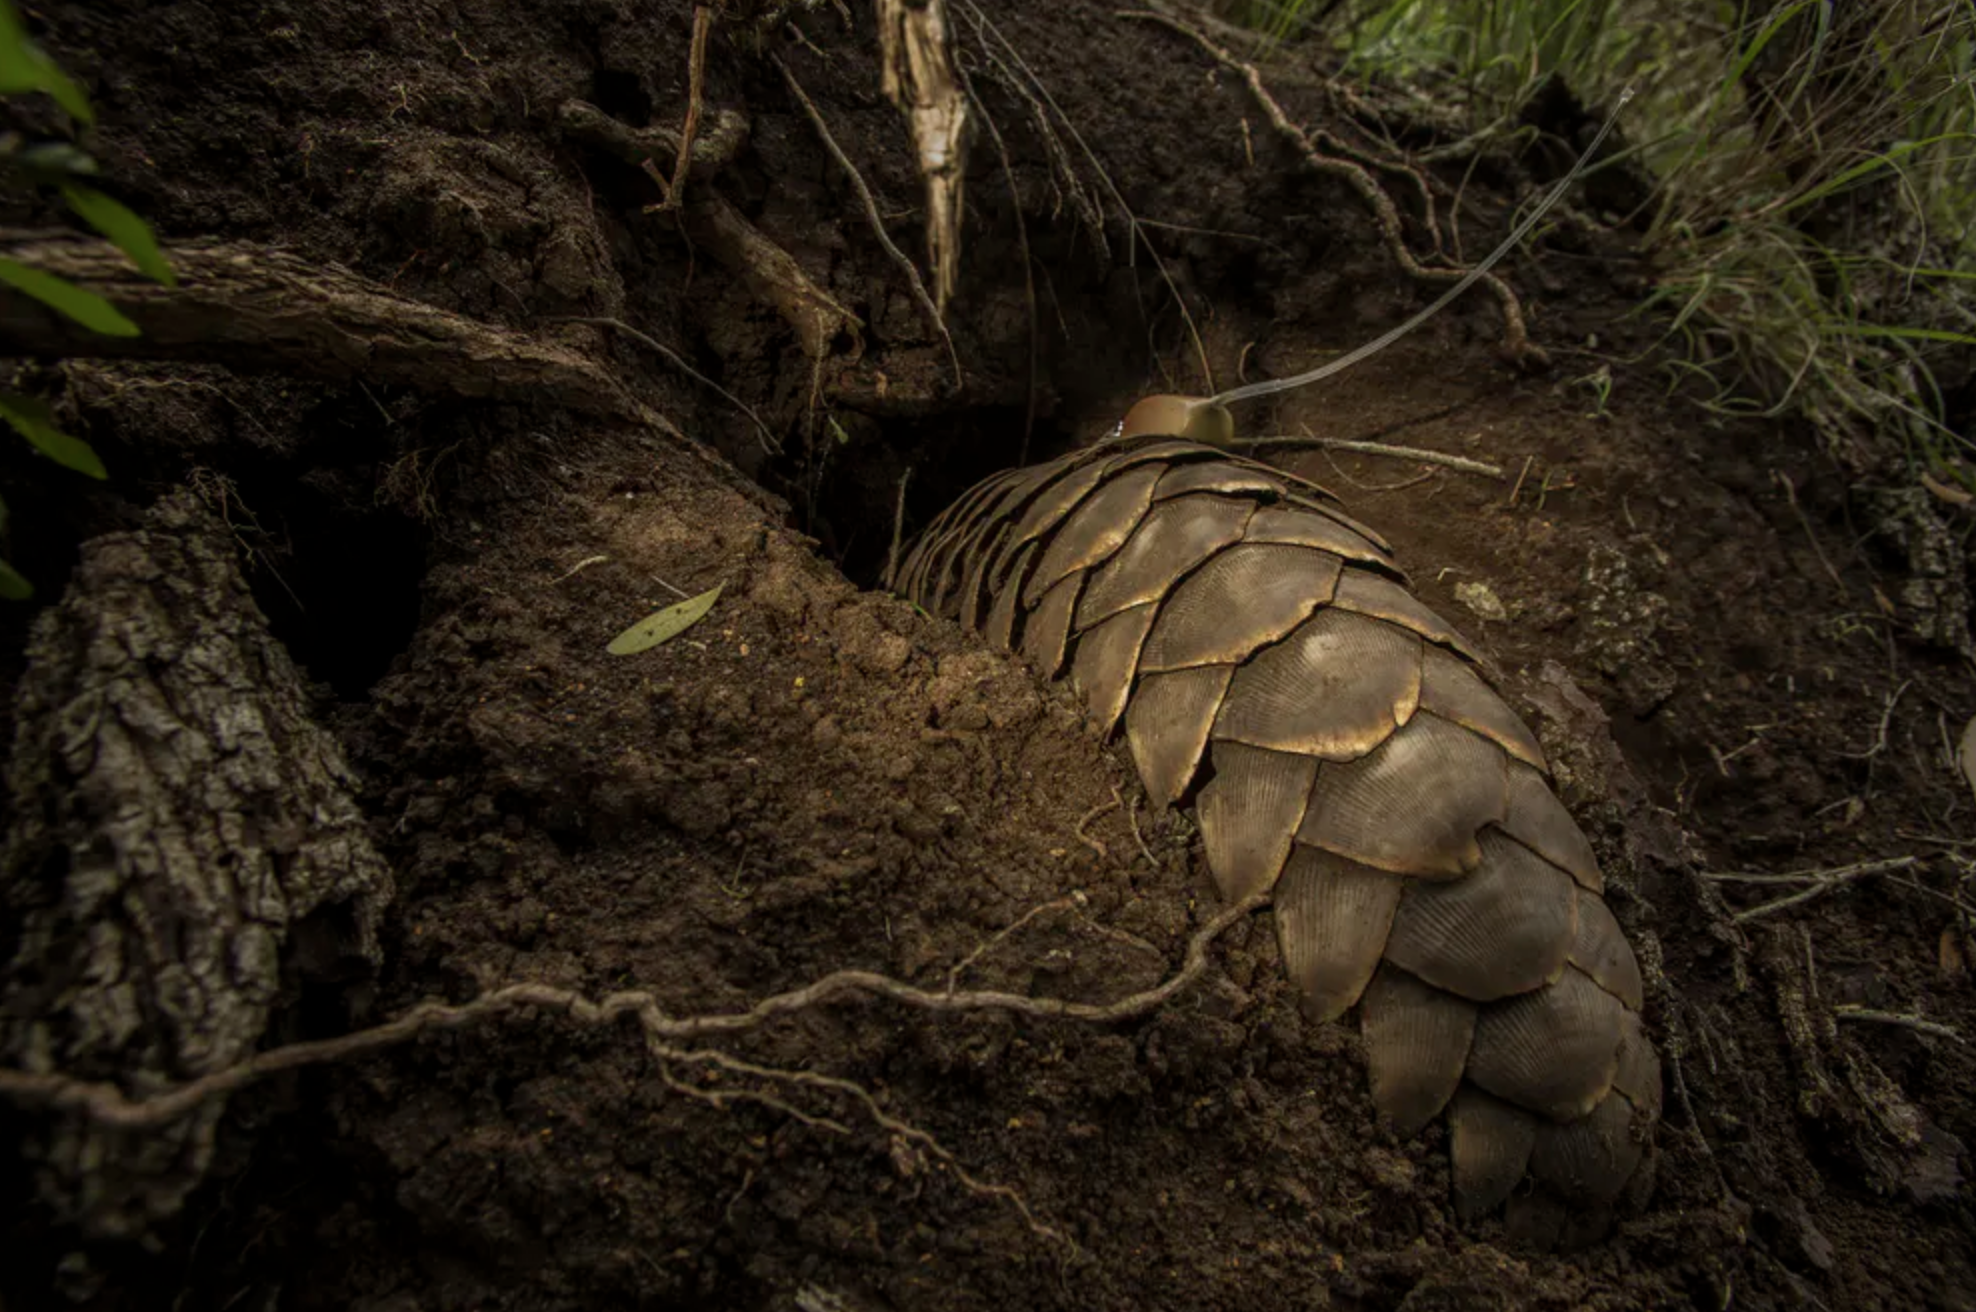 Released pangolins are located at burrows like this one.&nbsp;Alex Braczkowski